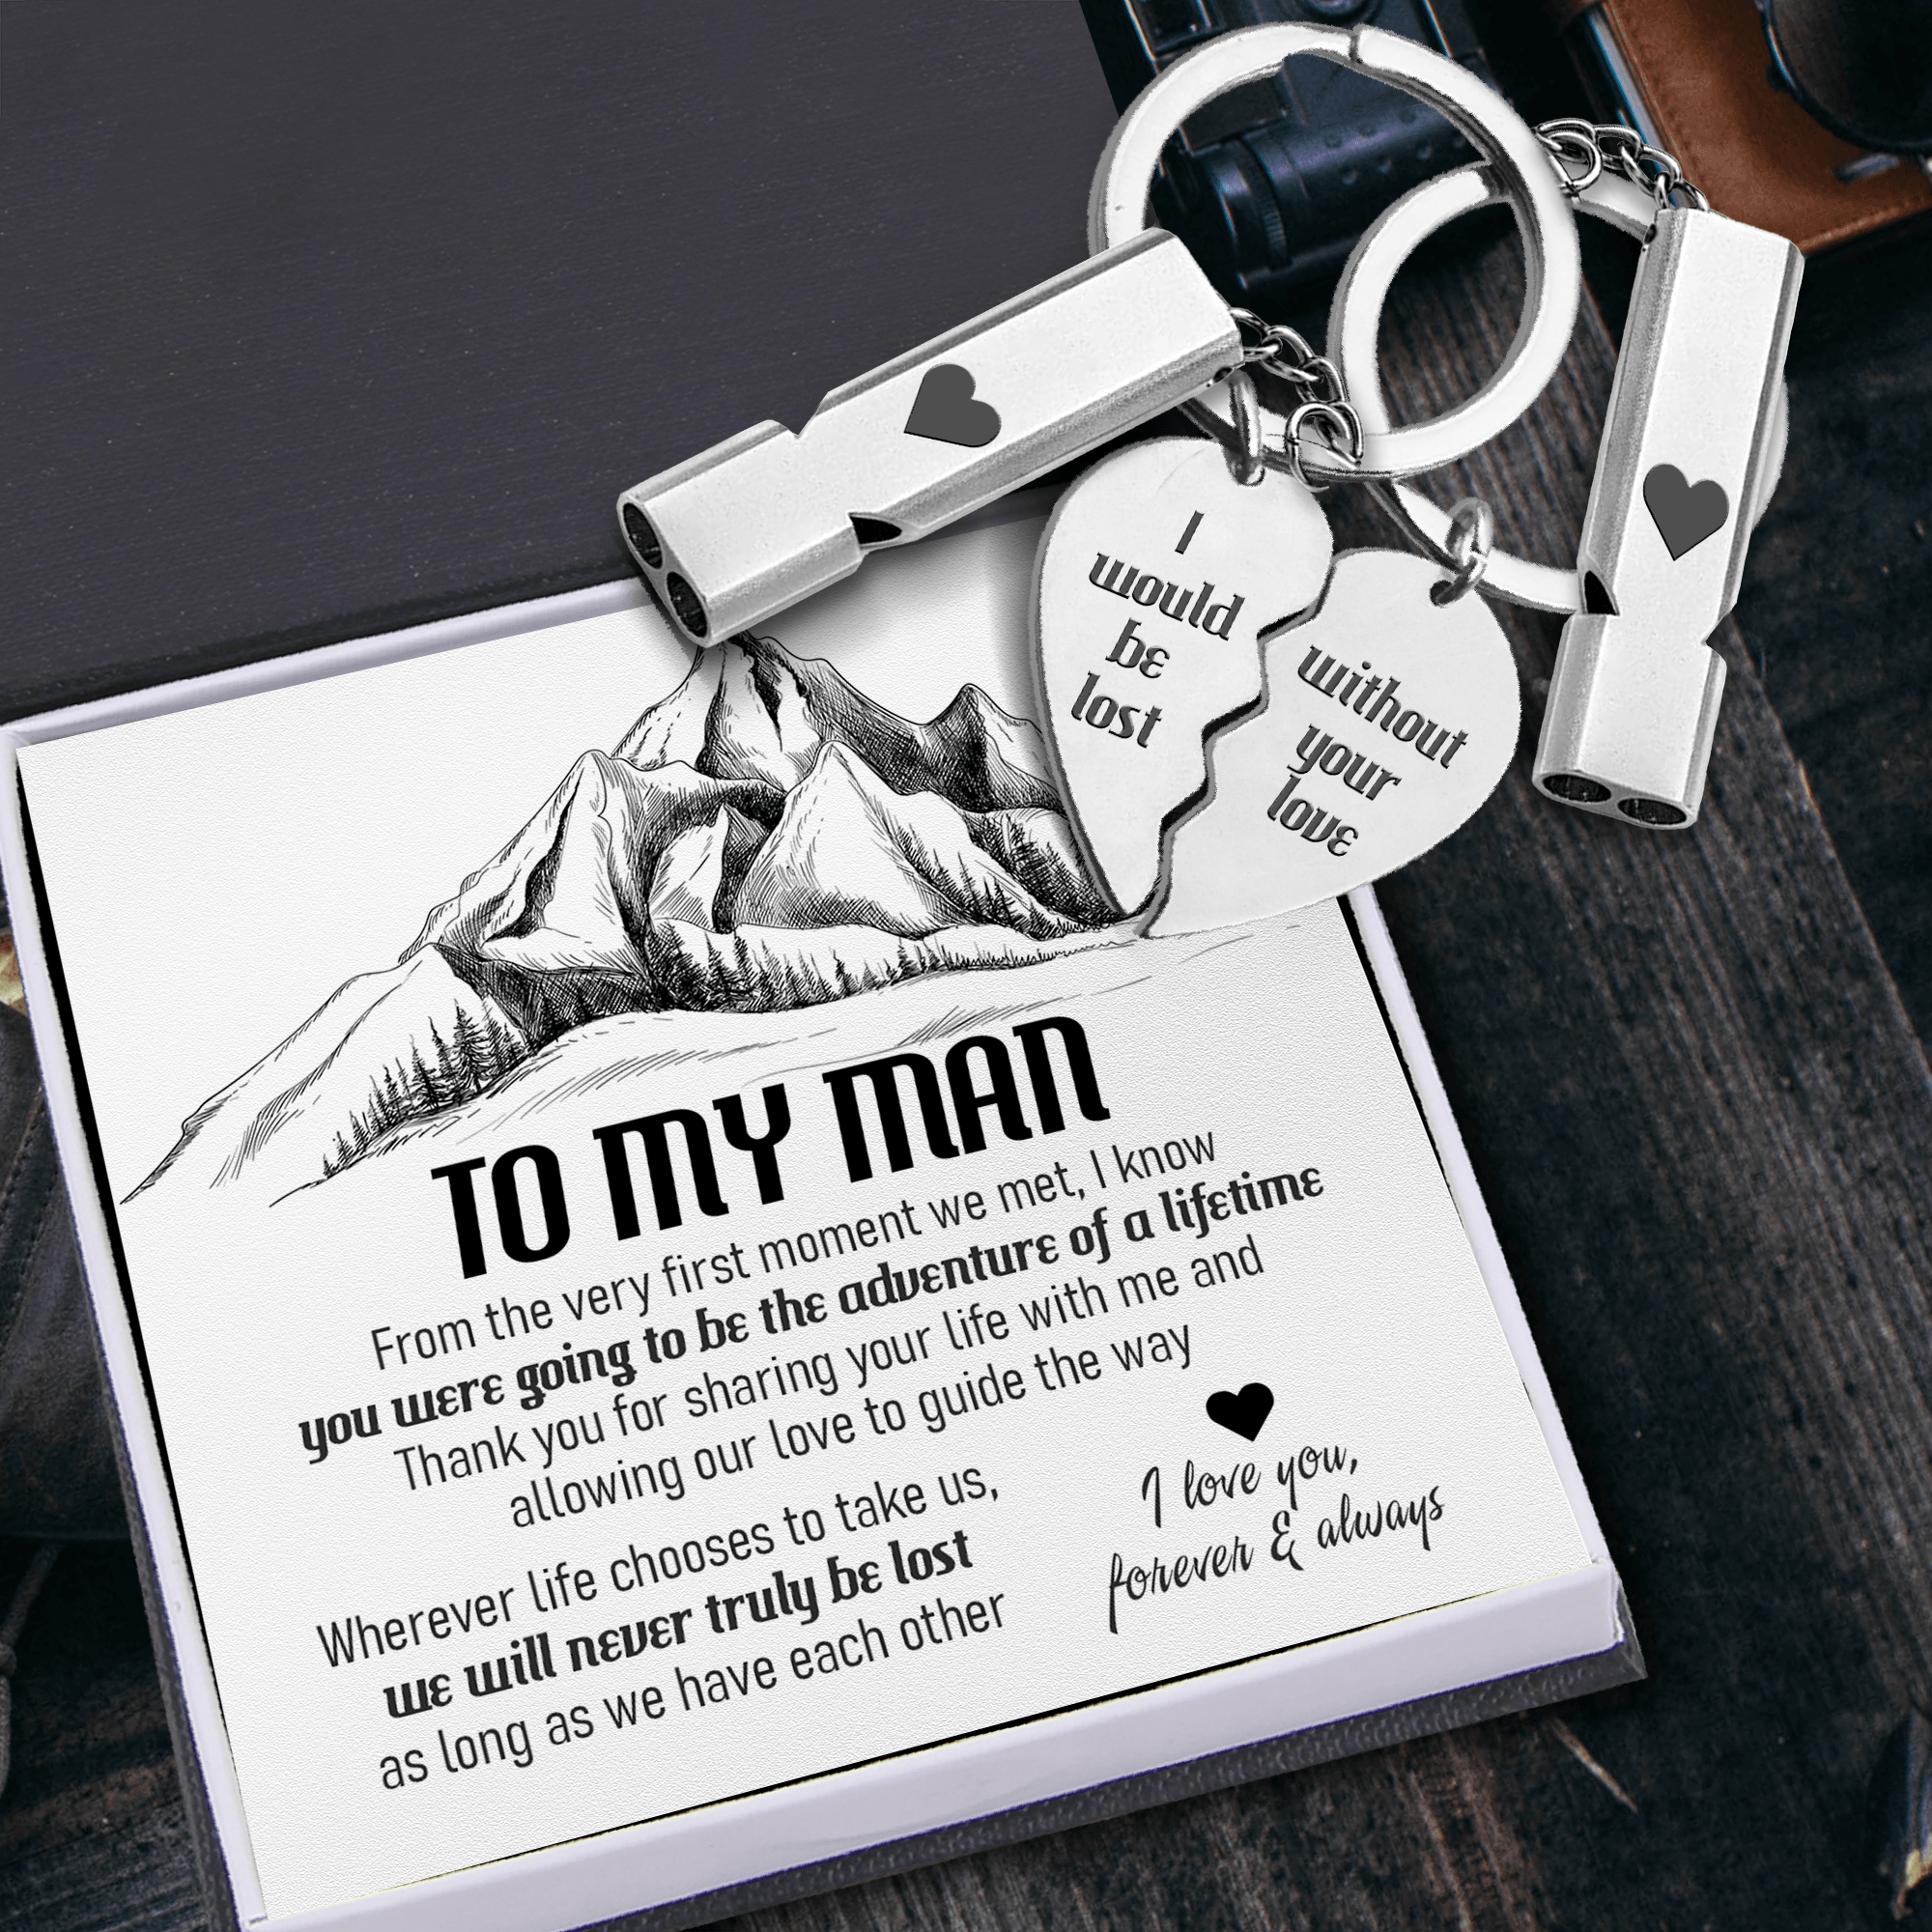 Couple Whistle Keychains - Hiking - To My Man - I Love You, Forever & Always - Augkzh26001 - Gifts Holder